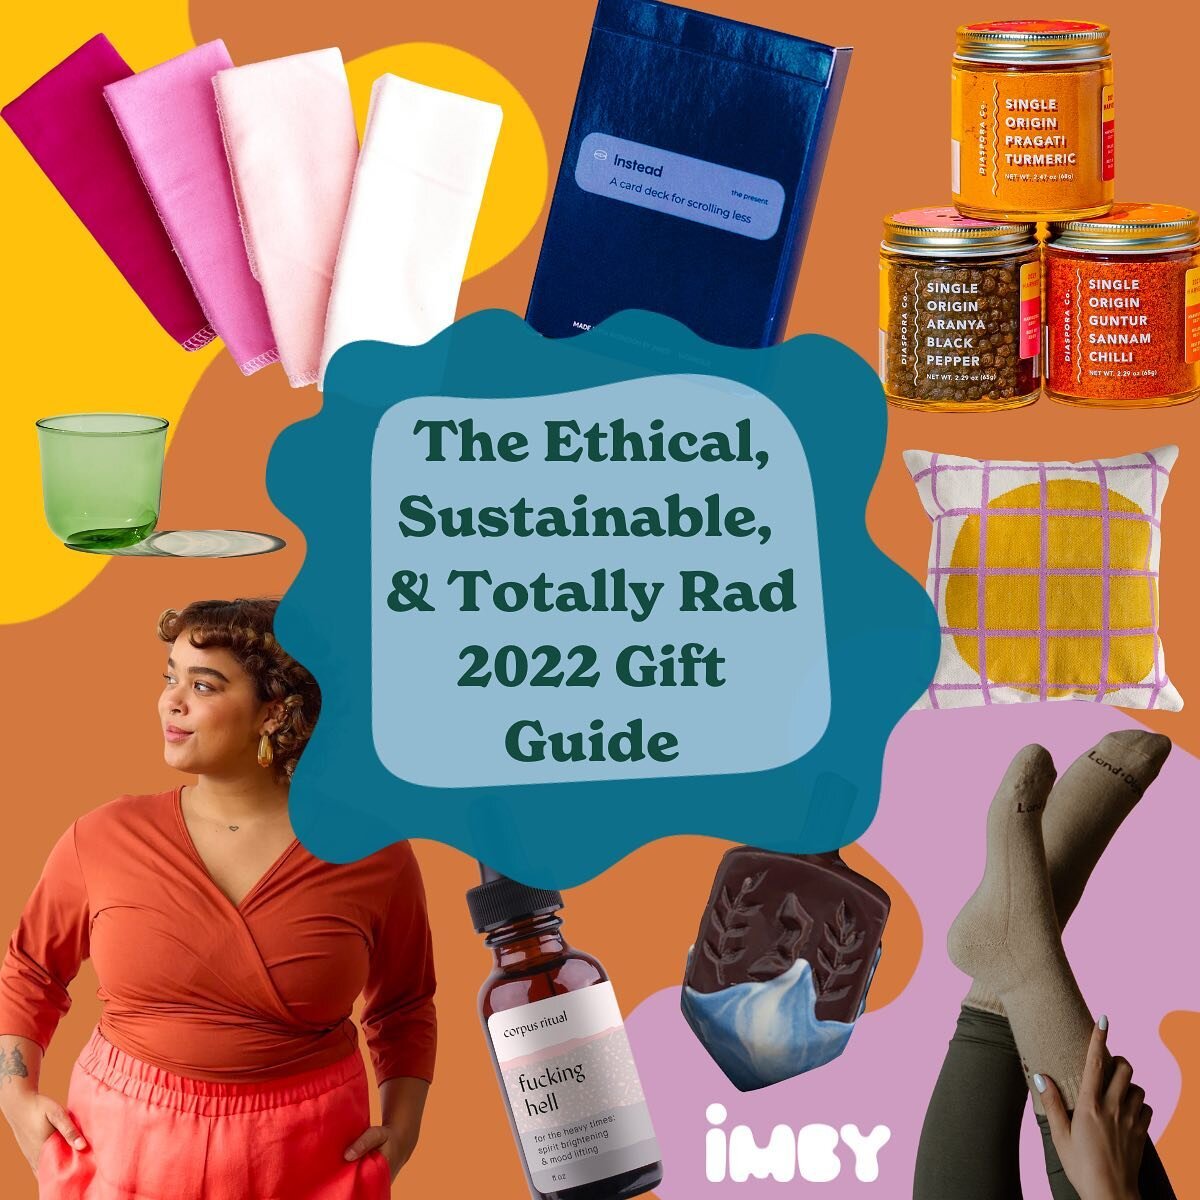 Our first ever gift guide has landed! 🎁 

Written by our member @mwelbel, the @gatherimby gift guide was curated to include our favorite intentional, equitable, sustainable, and ethical small businesses. Support them this small business Saturday (yo